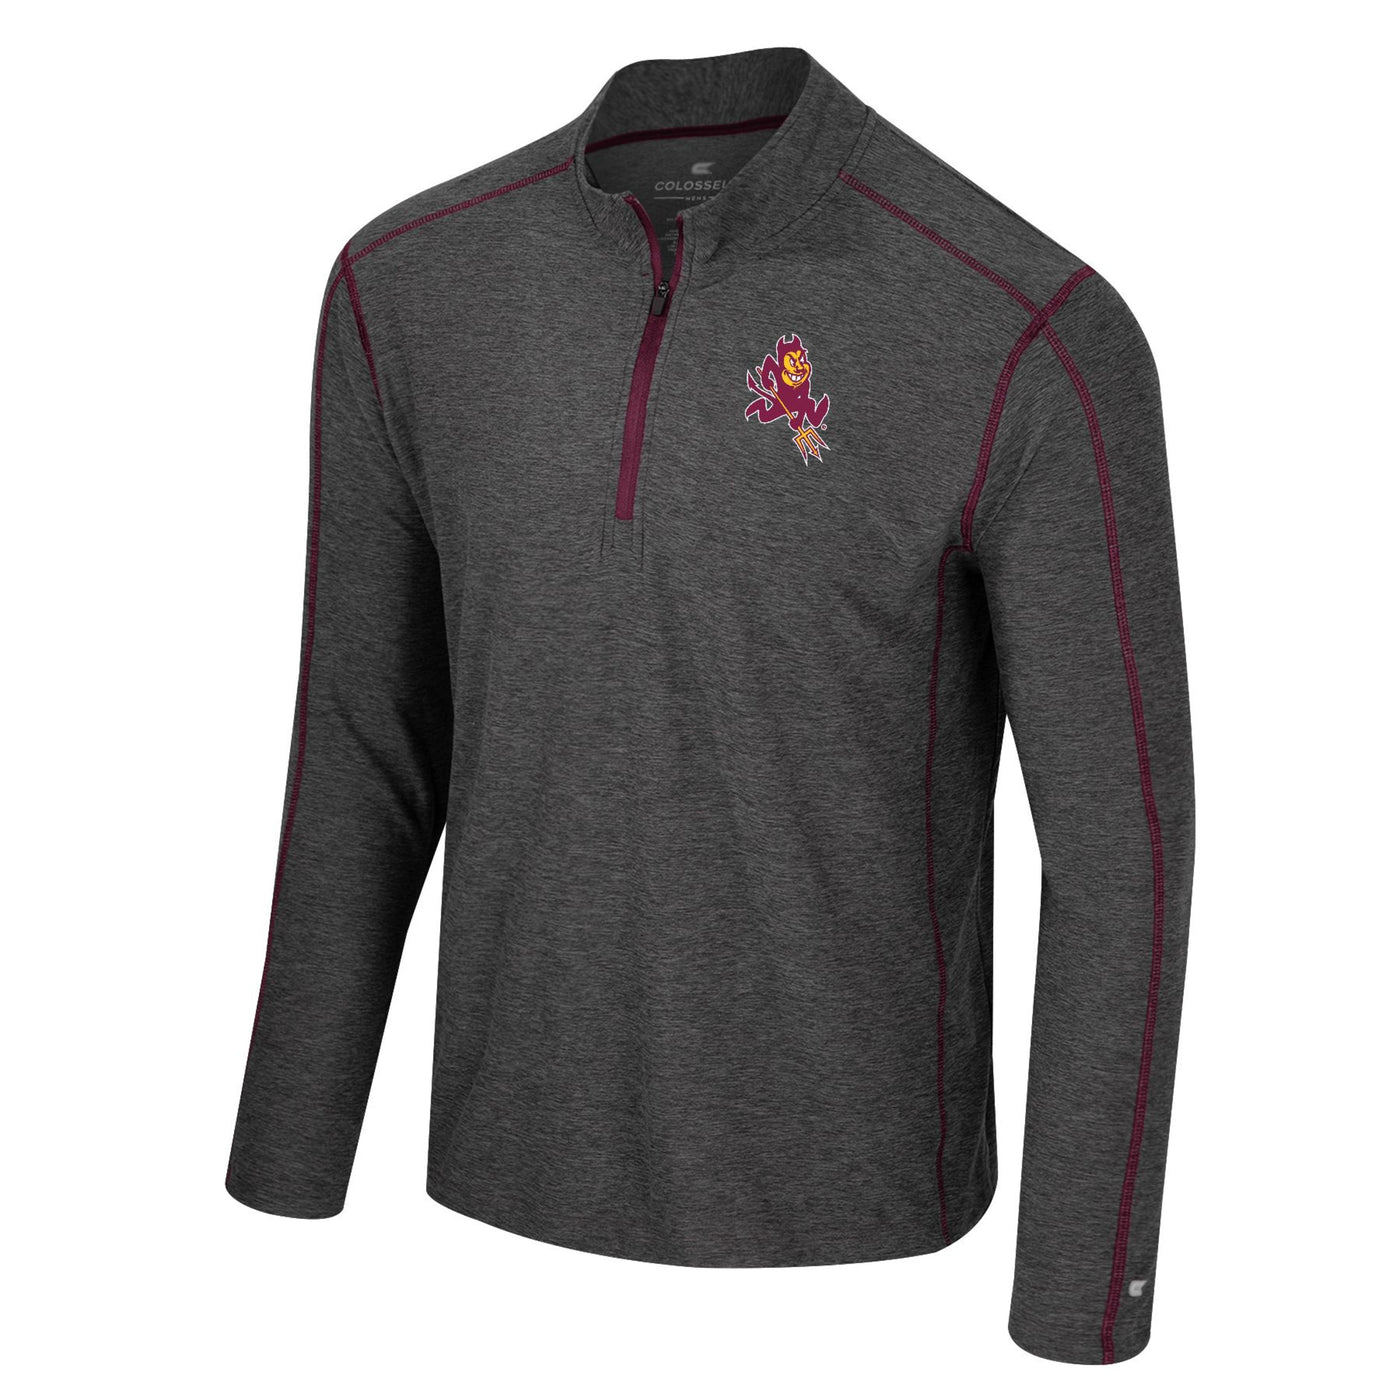 ASU grey 1/4 zip with maroon stitching, a maroon sipper, and a small sparky mascot on chest.